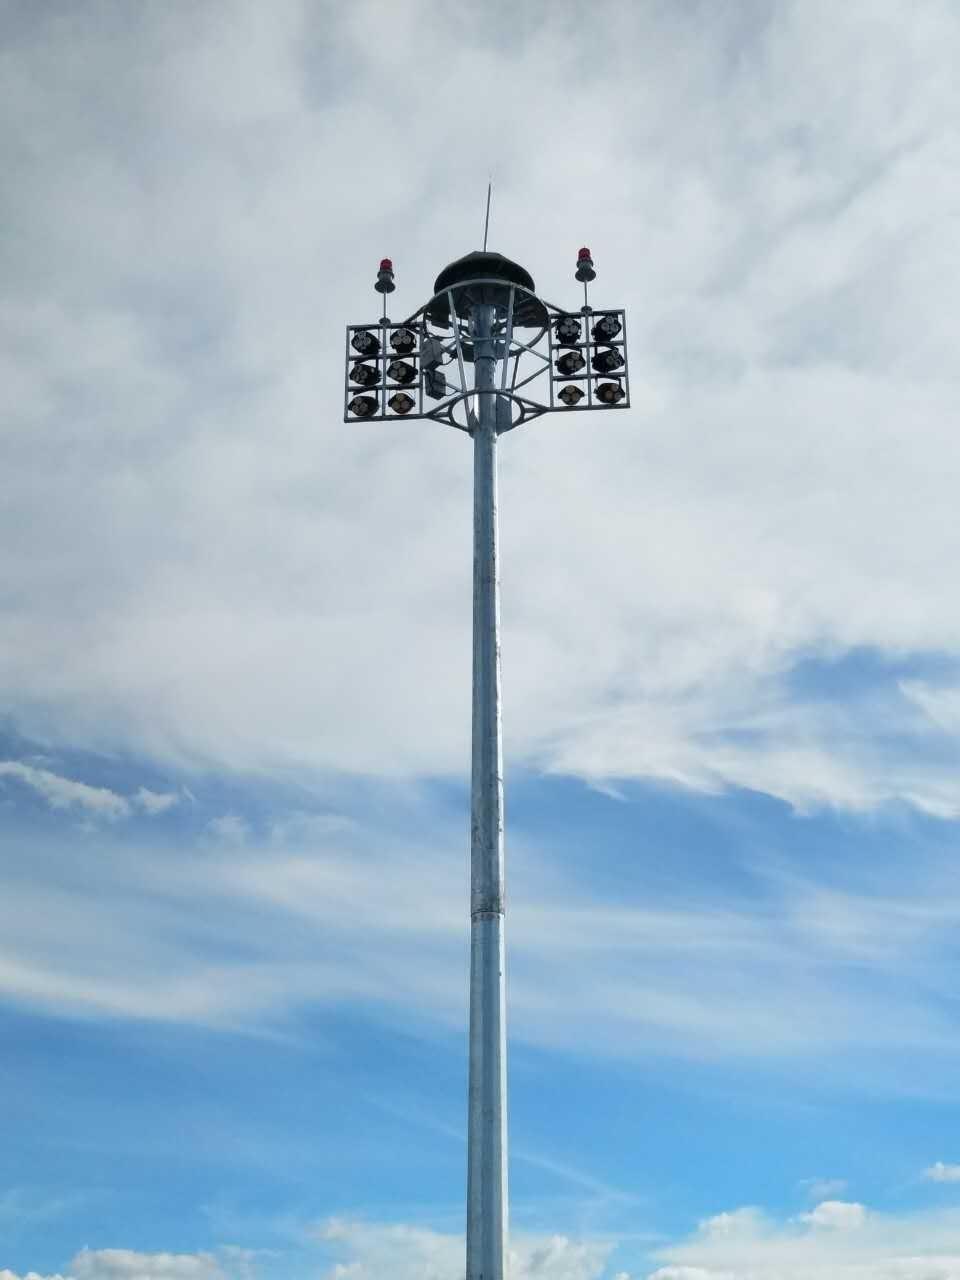 Prices of 30m 600W LED Flood High Mast Lighting for Seaport 5years Warranty